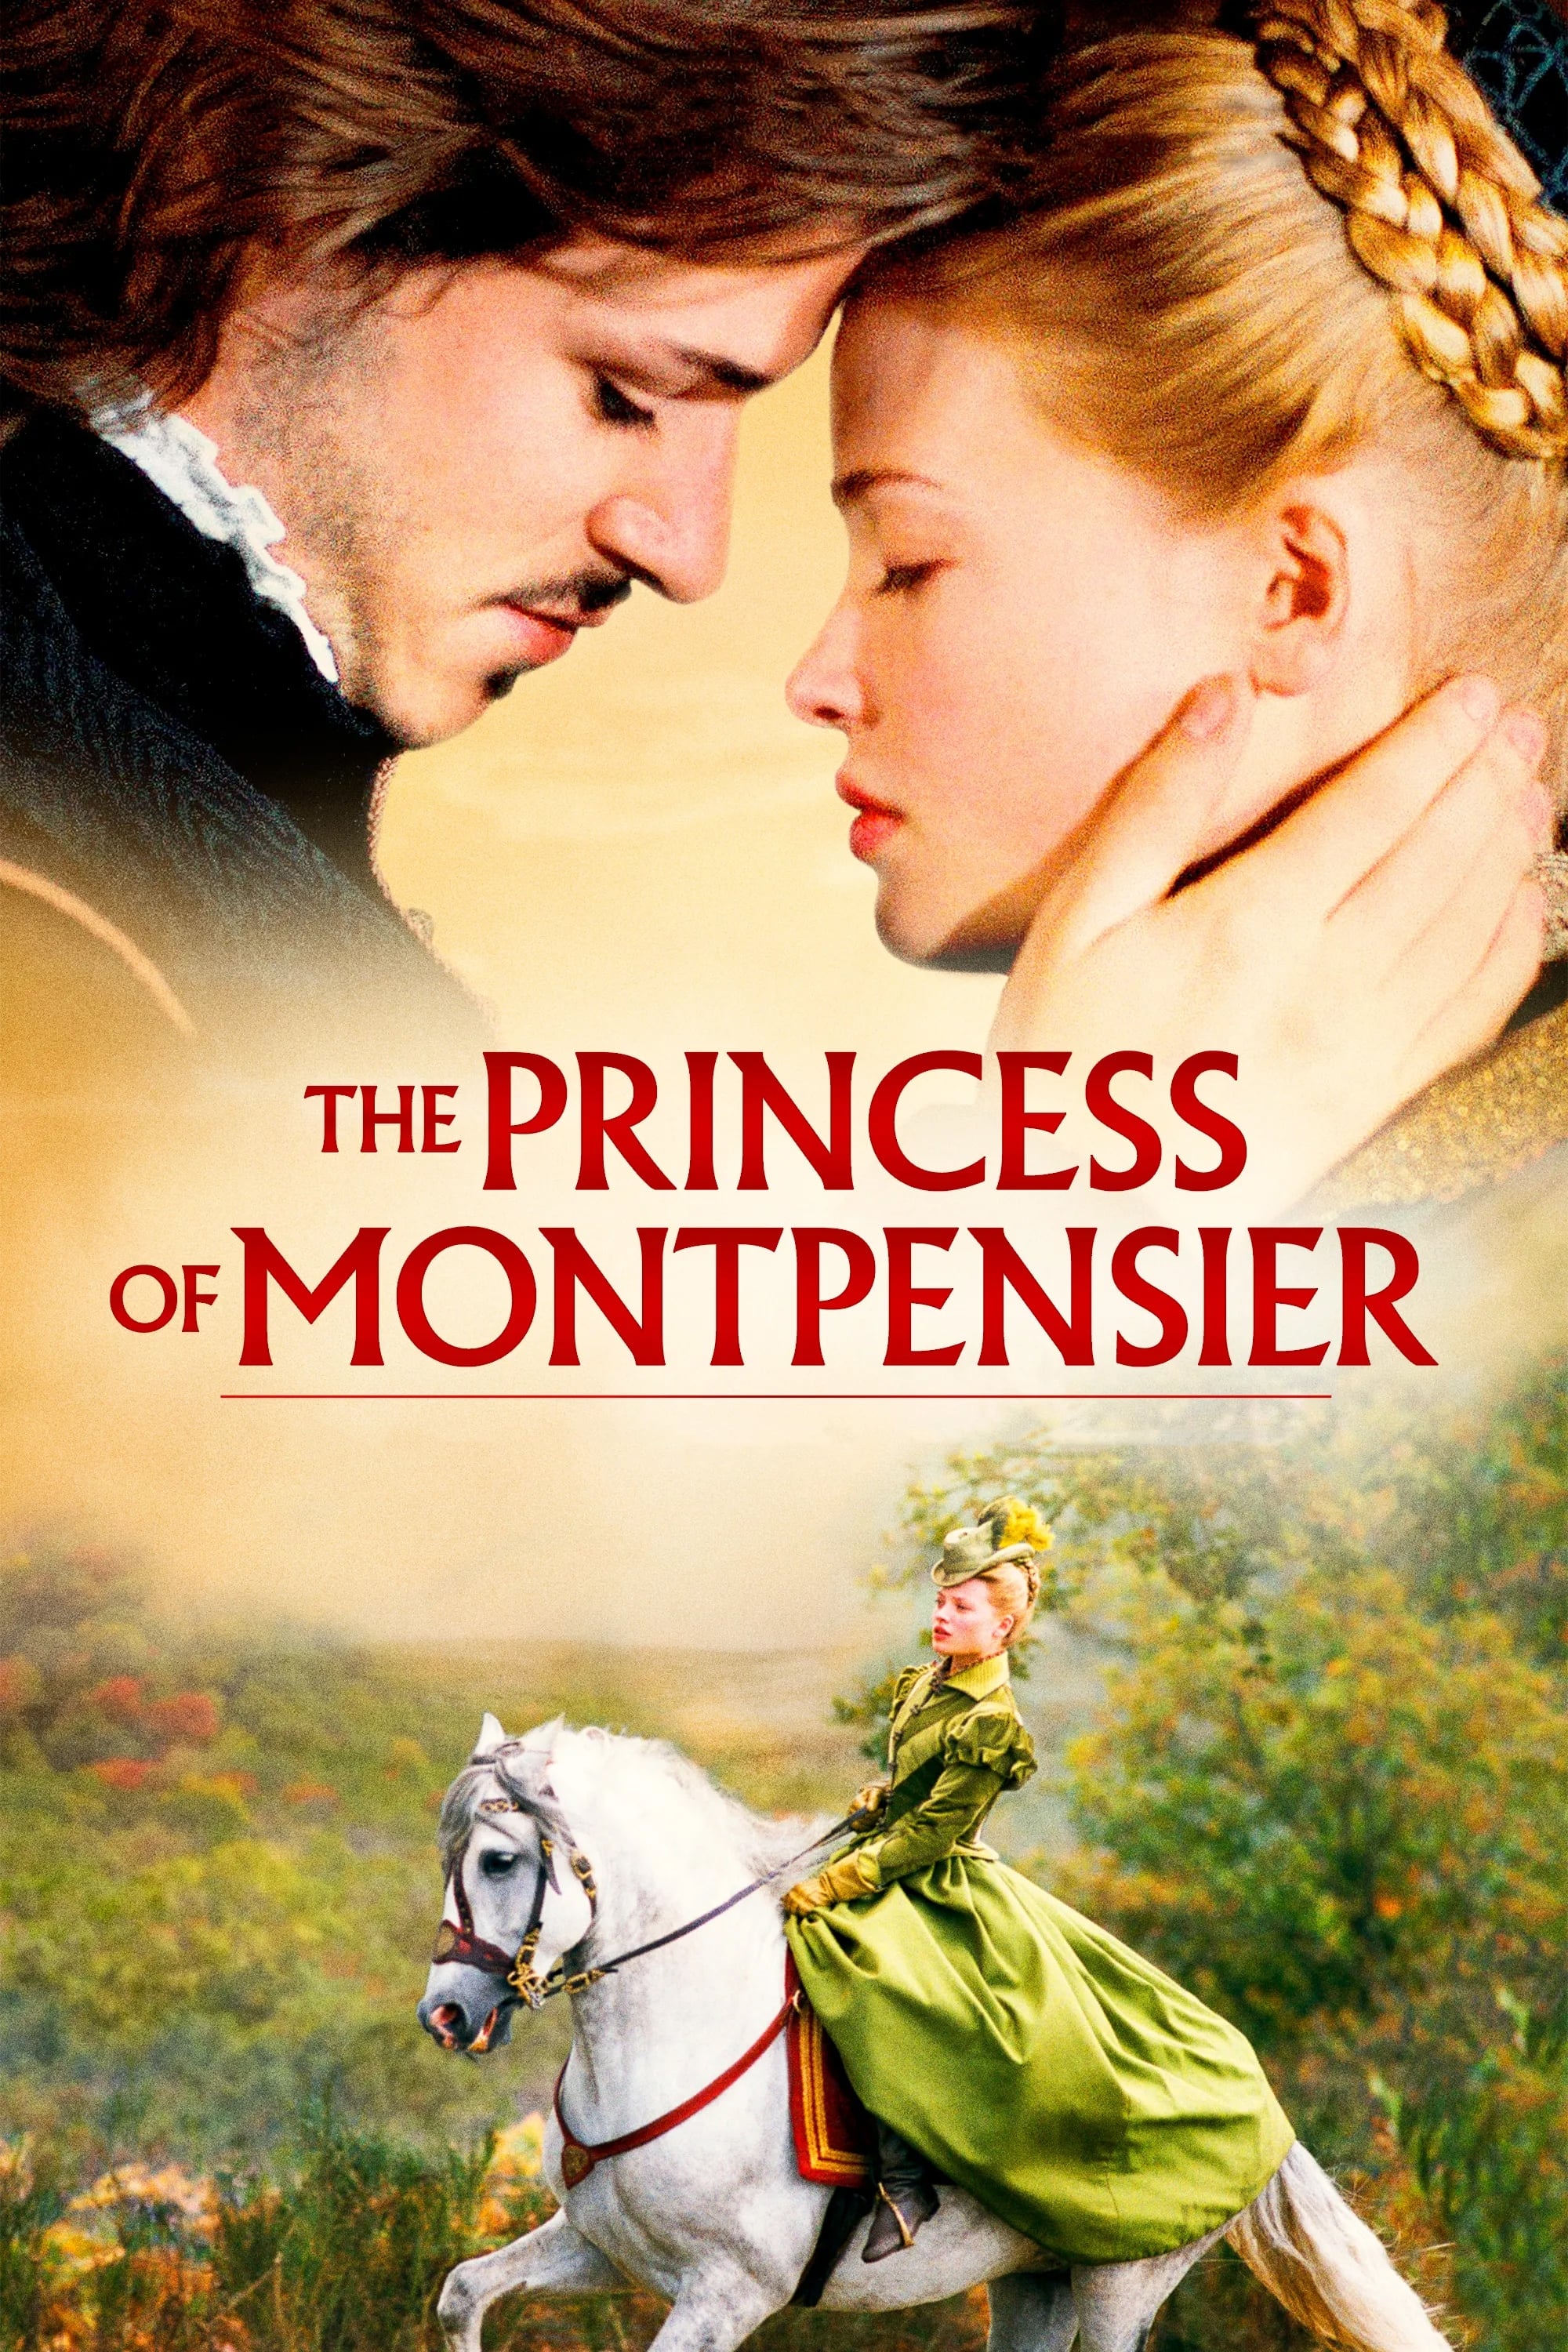 The Princess of Montpensier (2010)